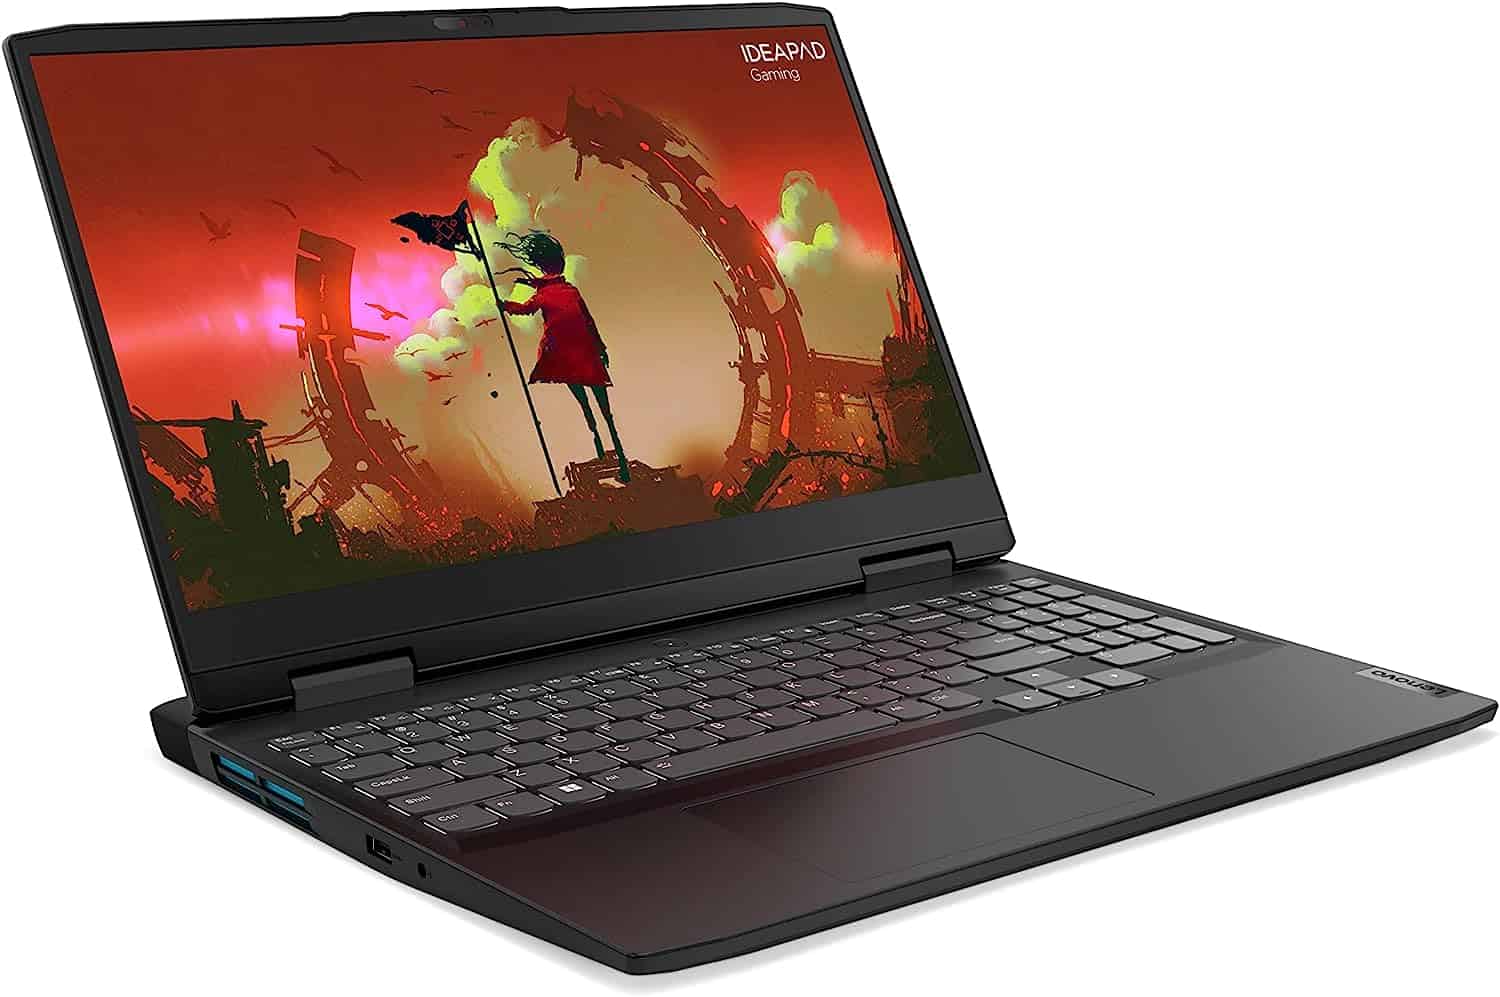 A Lenovo Ideapad Gaming 3 laptop with a black screen and an image of a woman.